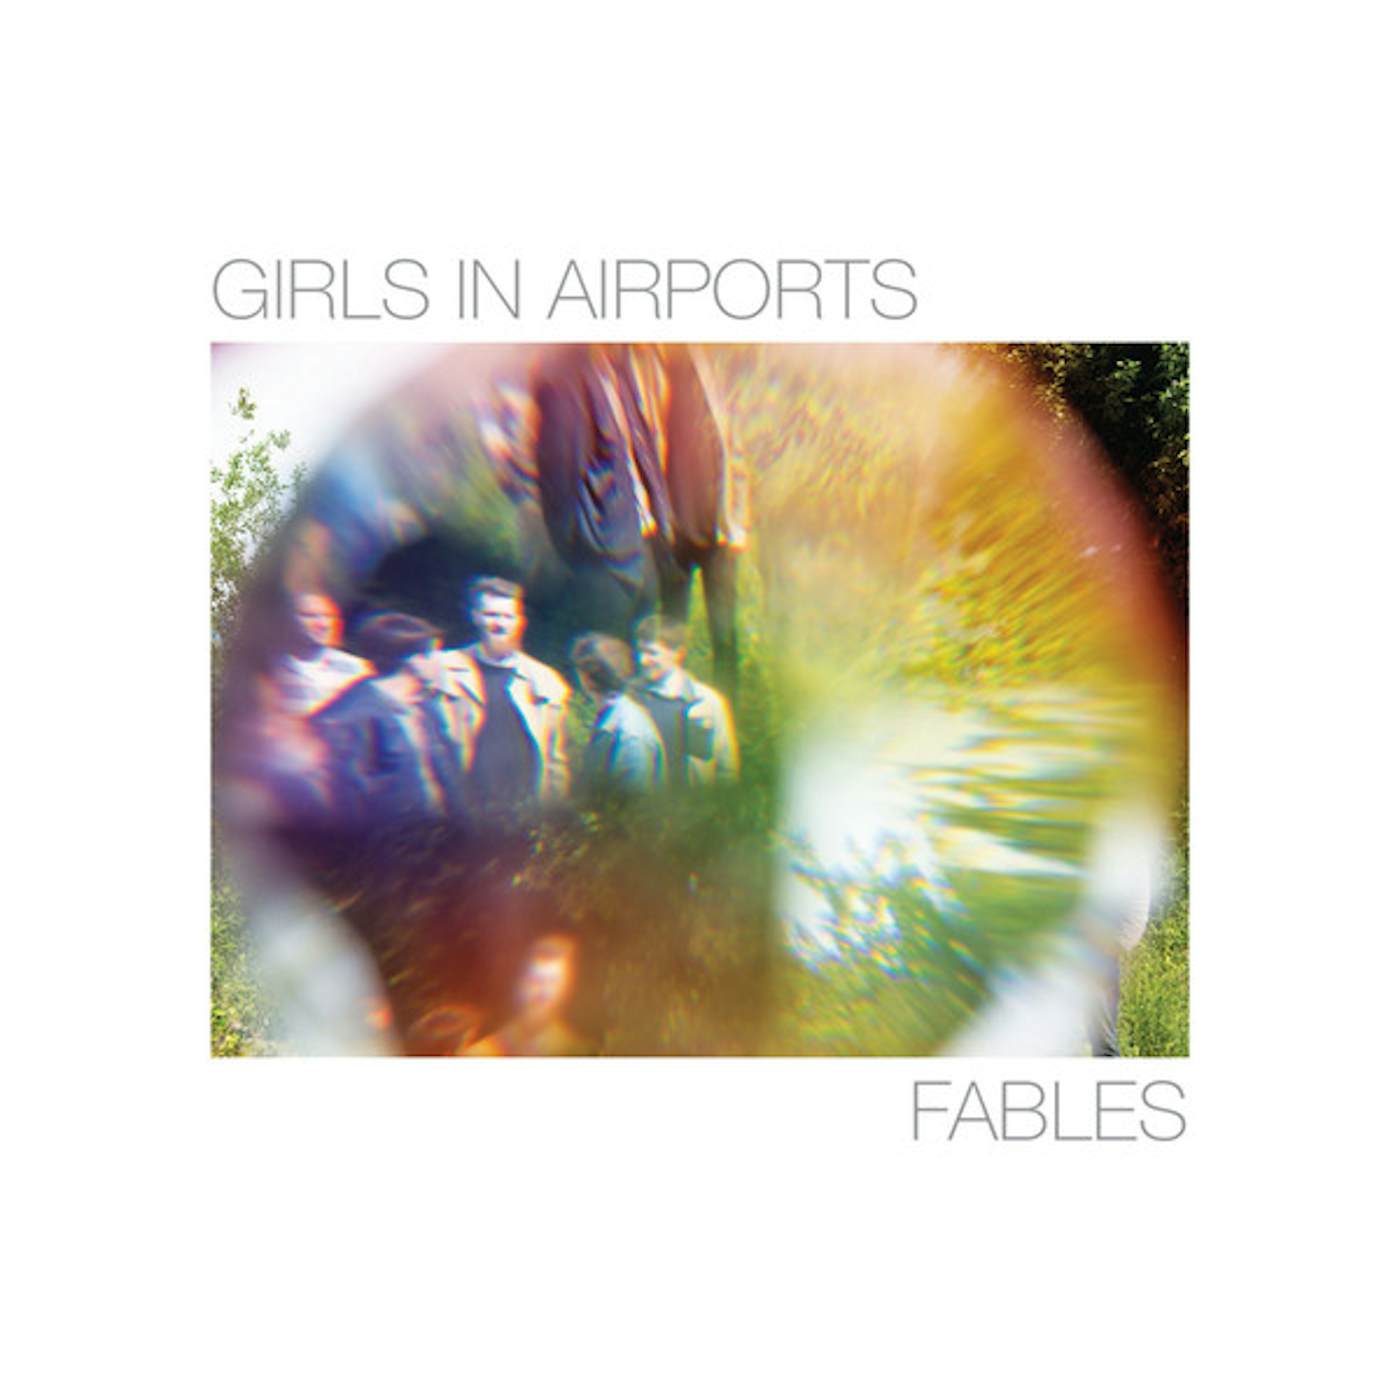 Girls in Airports Fables Vinyl Record